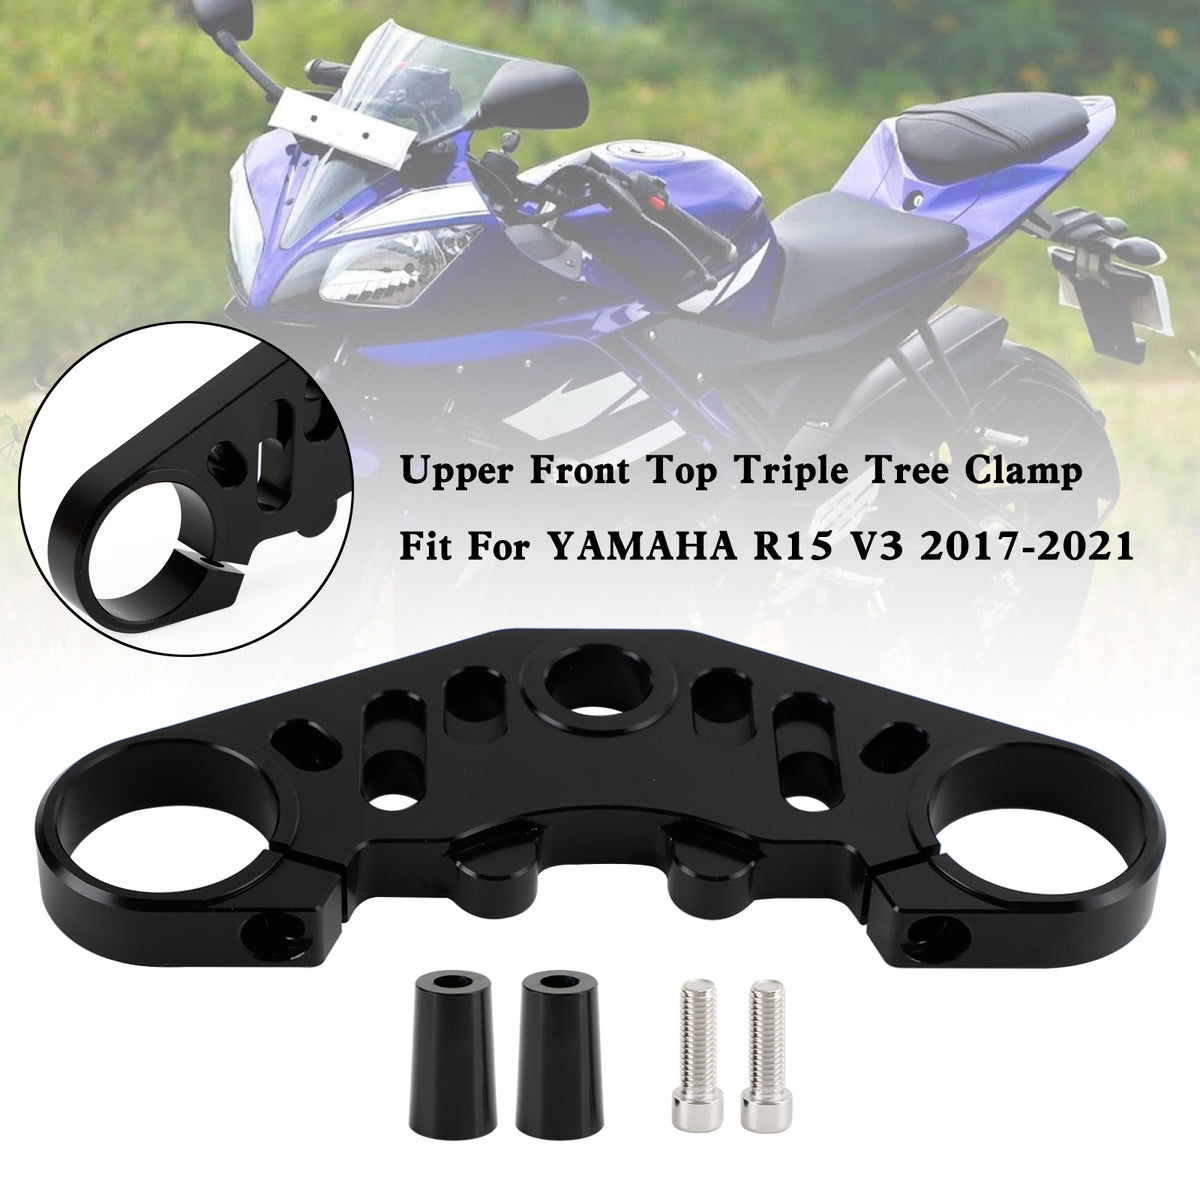 CNC Aluminum Upper Front Top Triple Tree Clamp For YAMAHA R15 V3 2017-2021 Generic